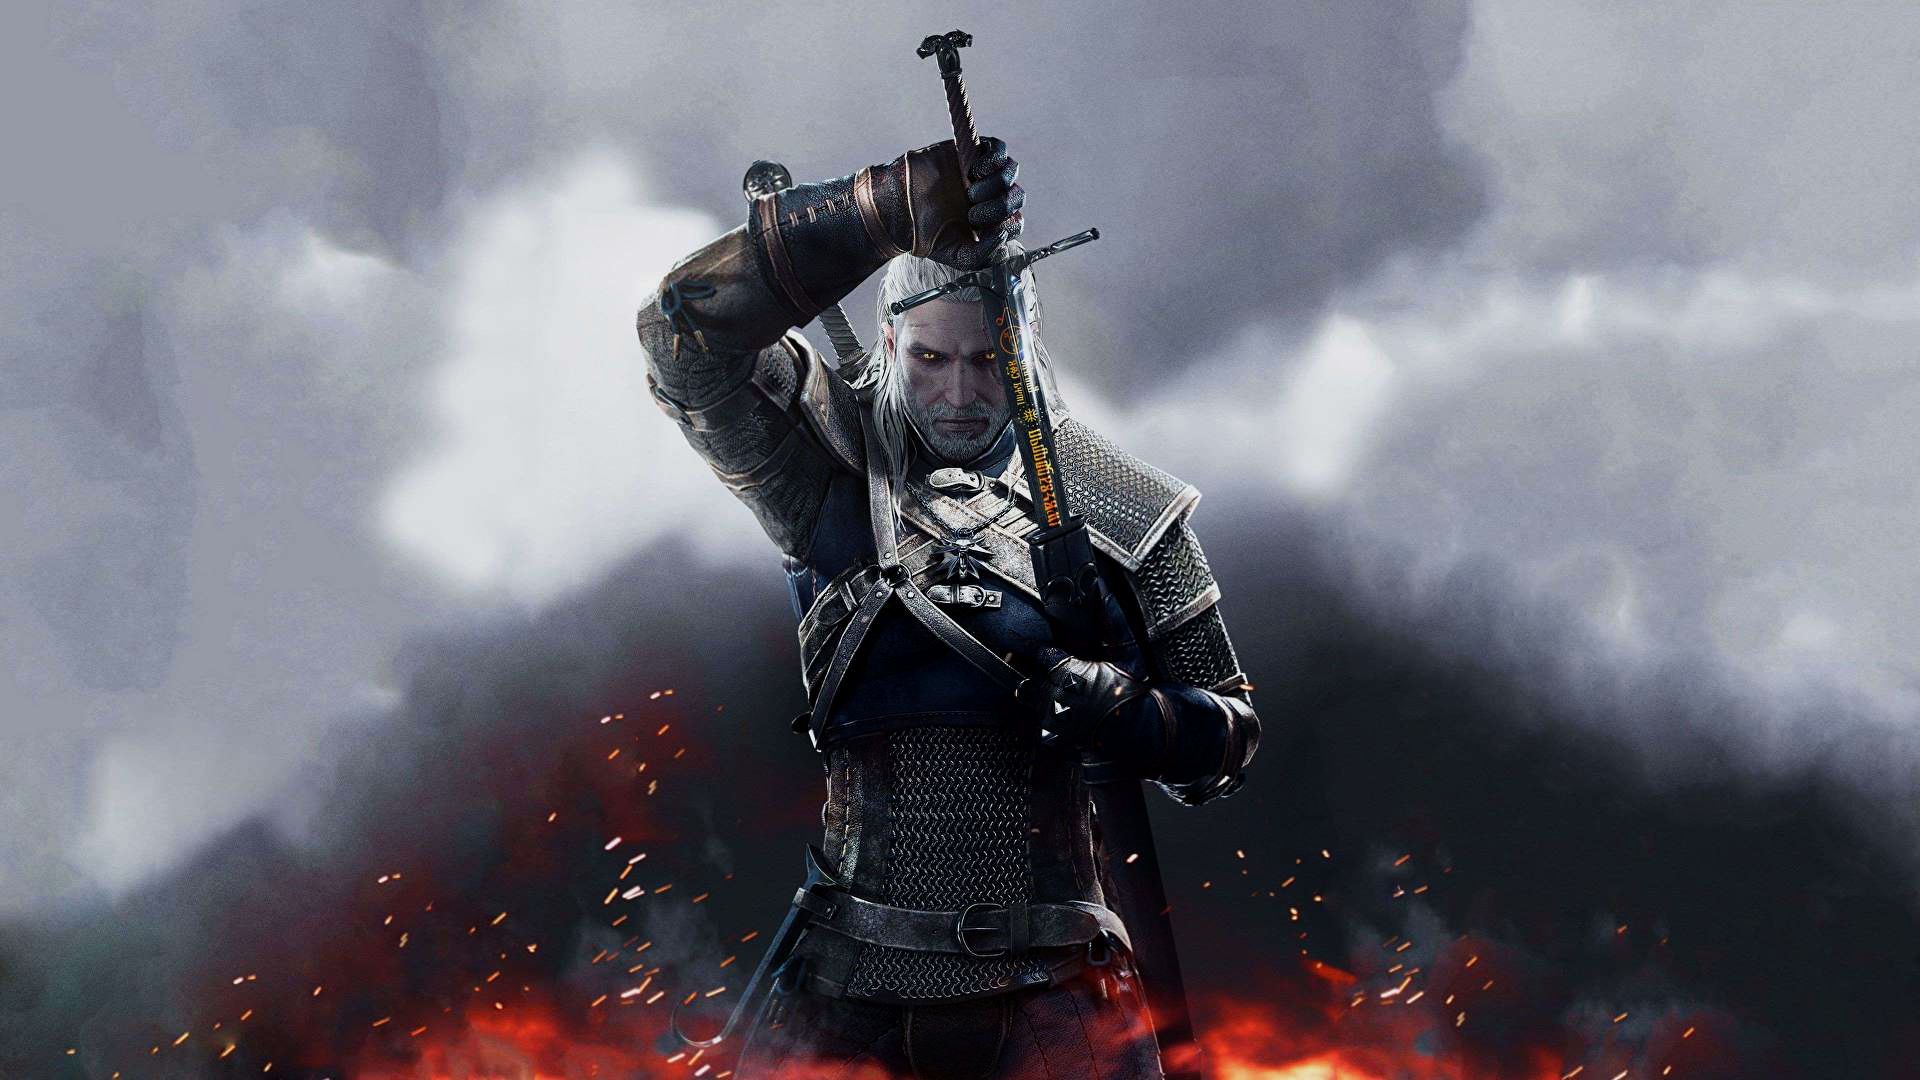 Image for The Witcher 3 next-gen version coming to PC, PS5 and Xbox Series X/S in Q4 2022